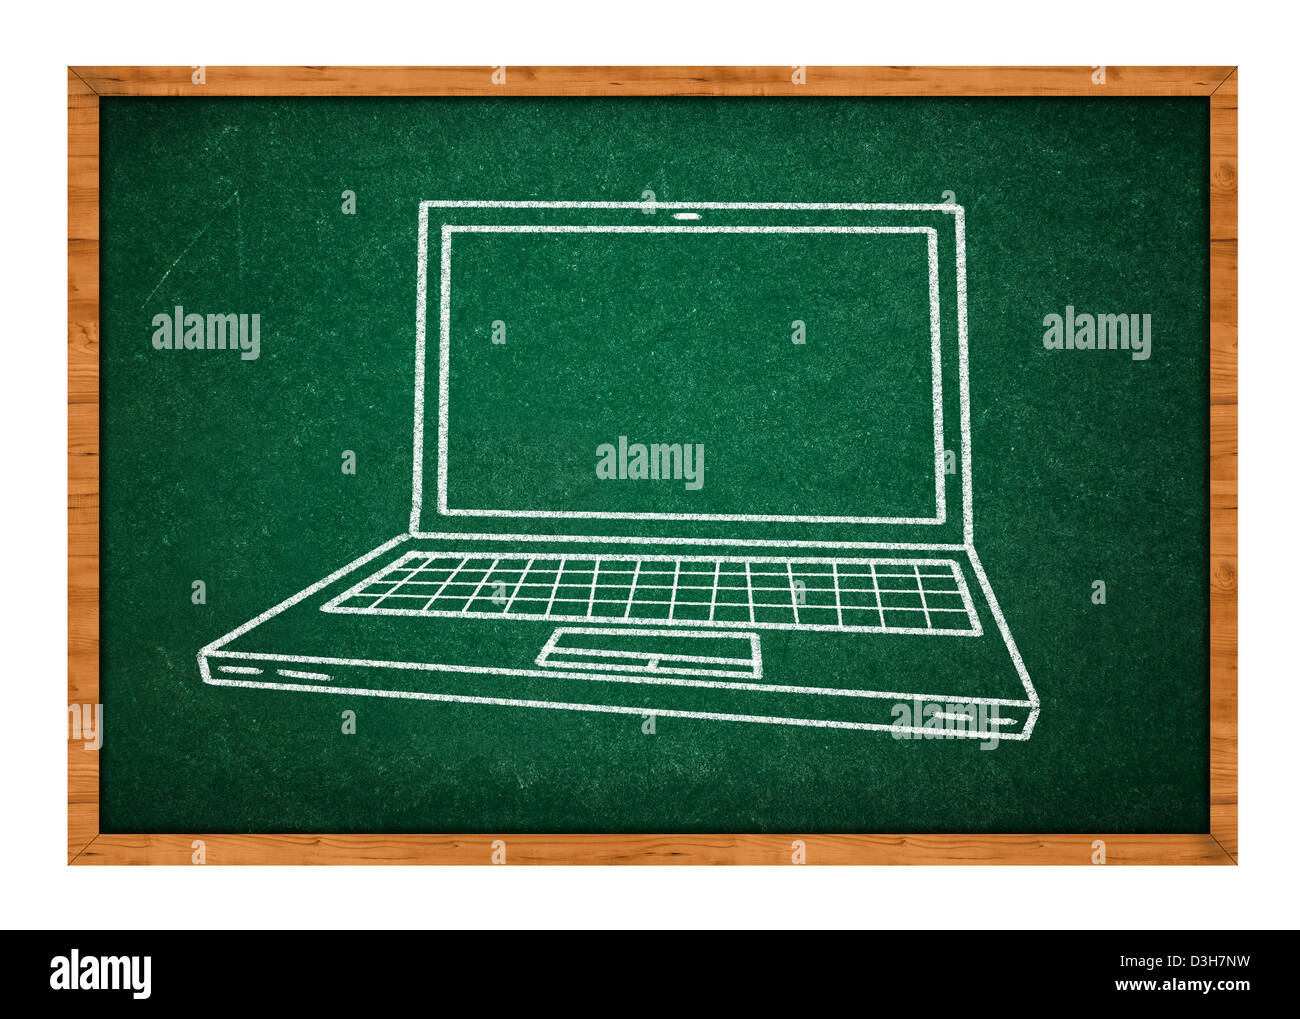 Simple drawing of laptop or notebook computer on a green school chalkboard. Stock Photo